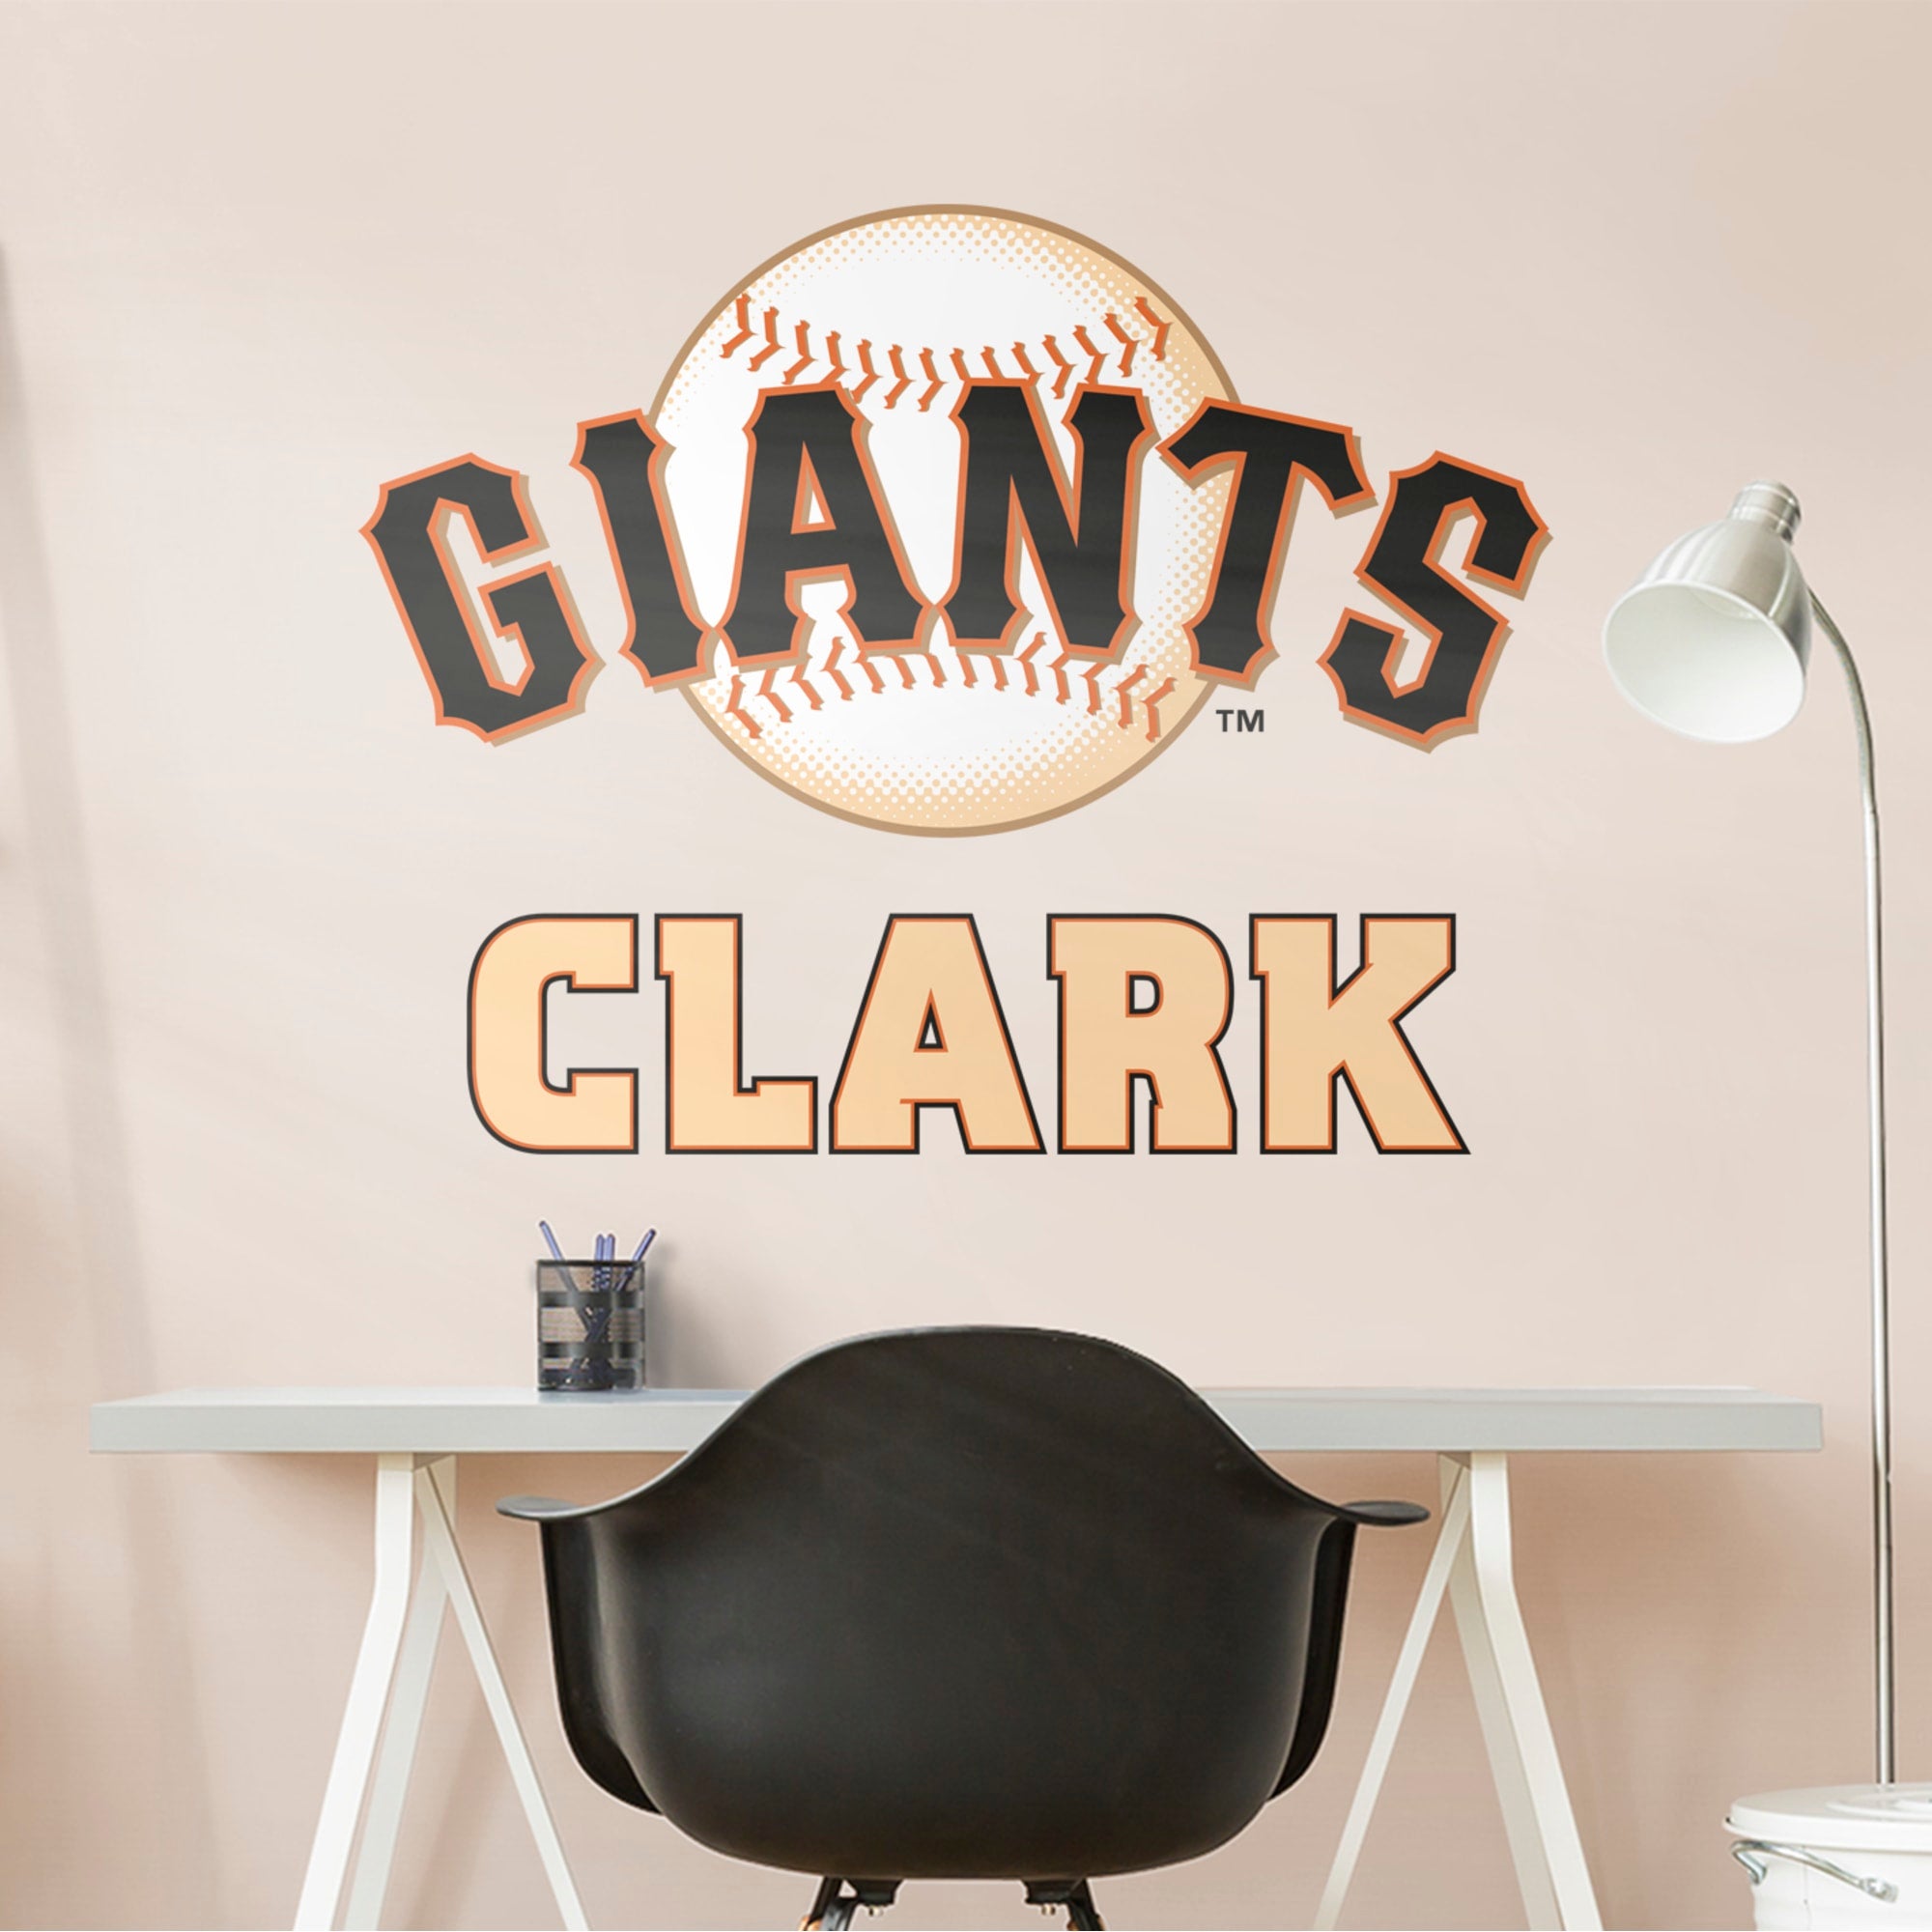 San Francisco Giants: Stacked Personalized Name - Officially Licensed MLB Transfer Decal in Cream (52"W x 39.5"H) by Fathead | V